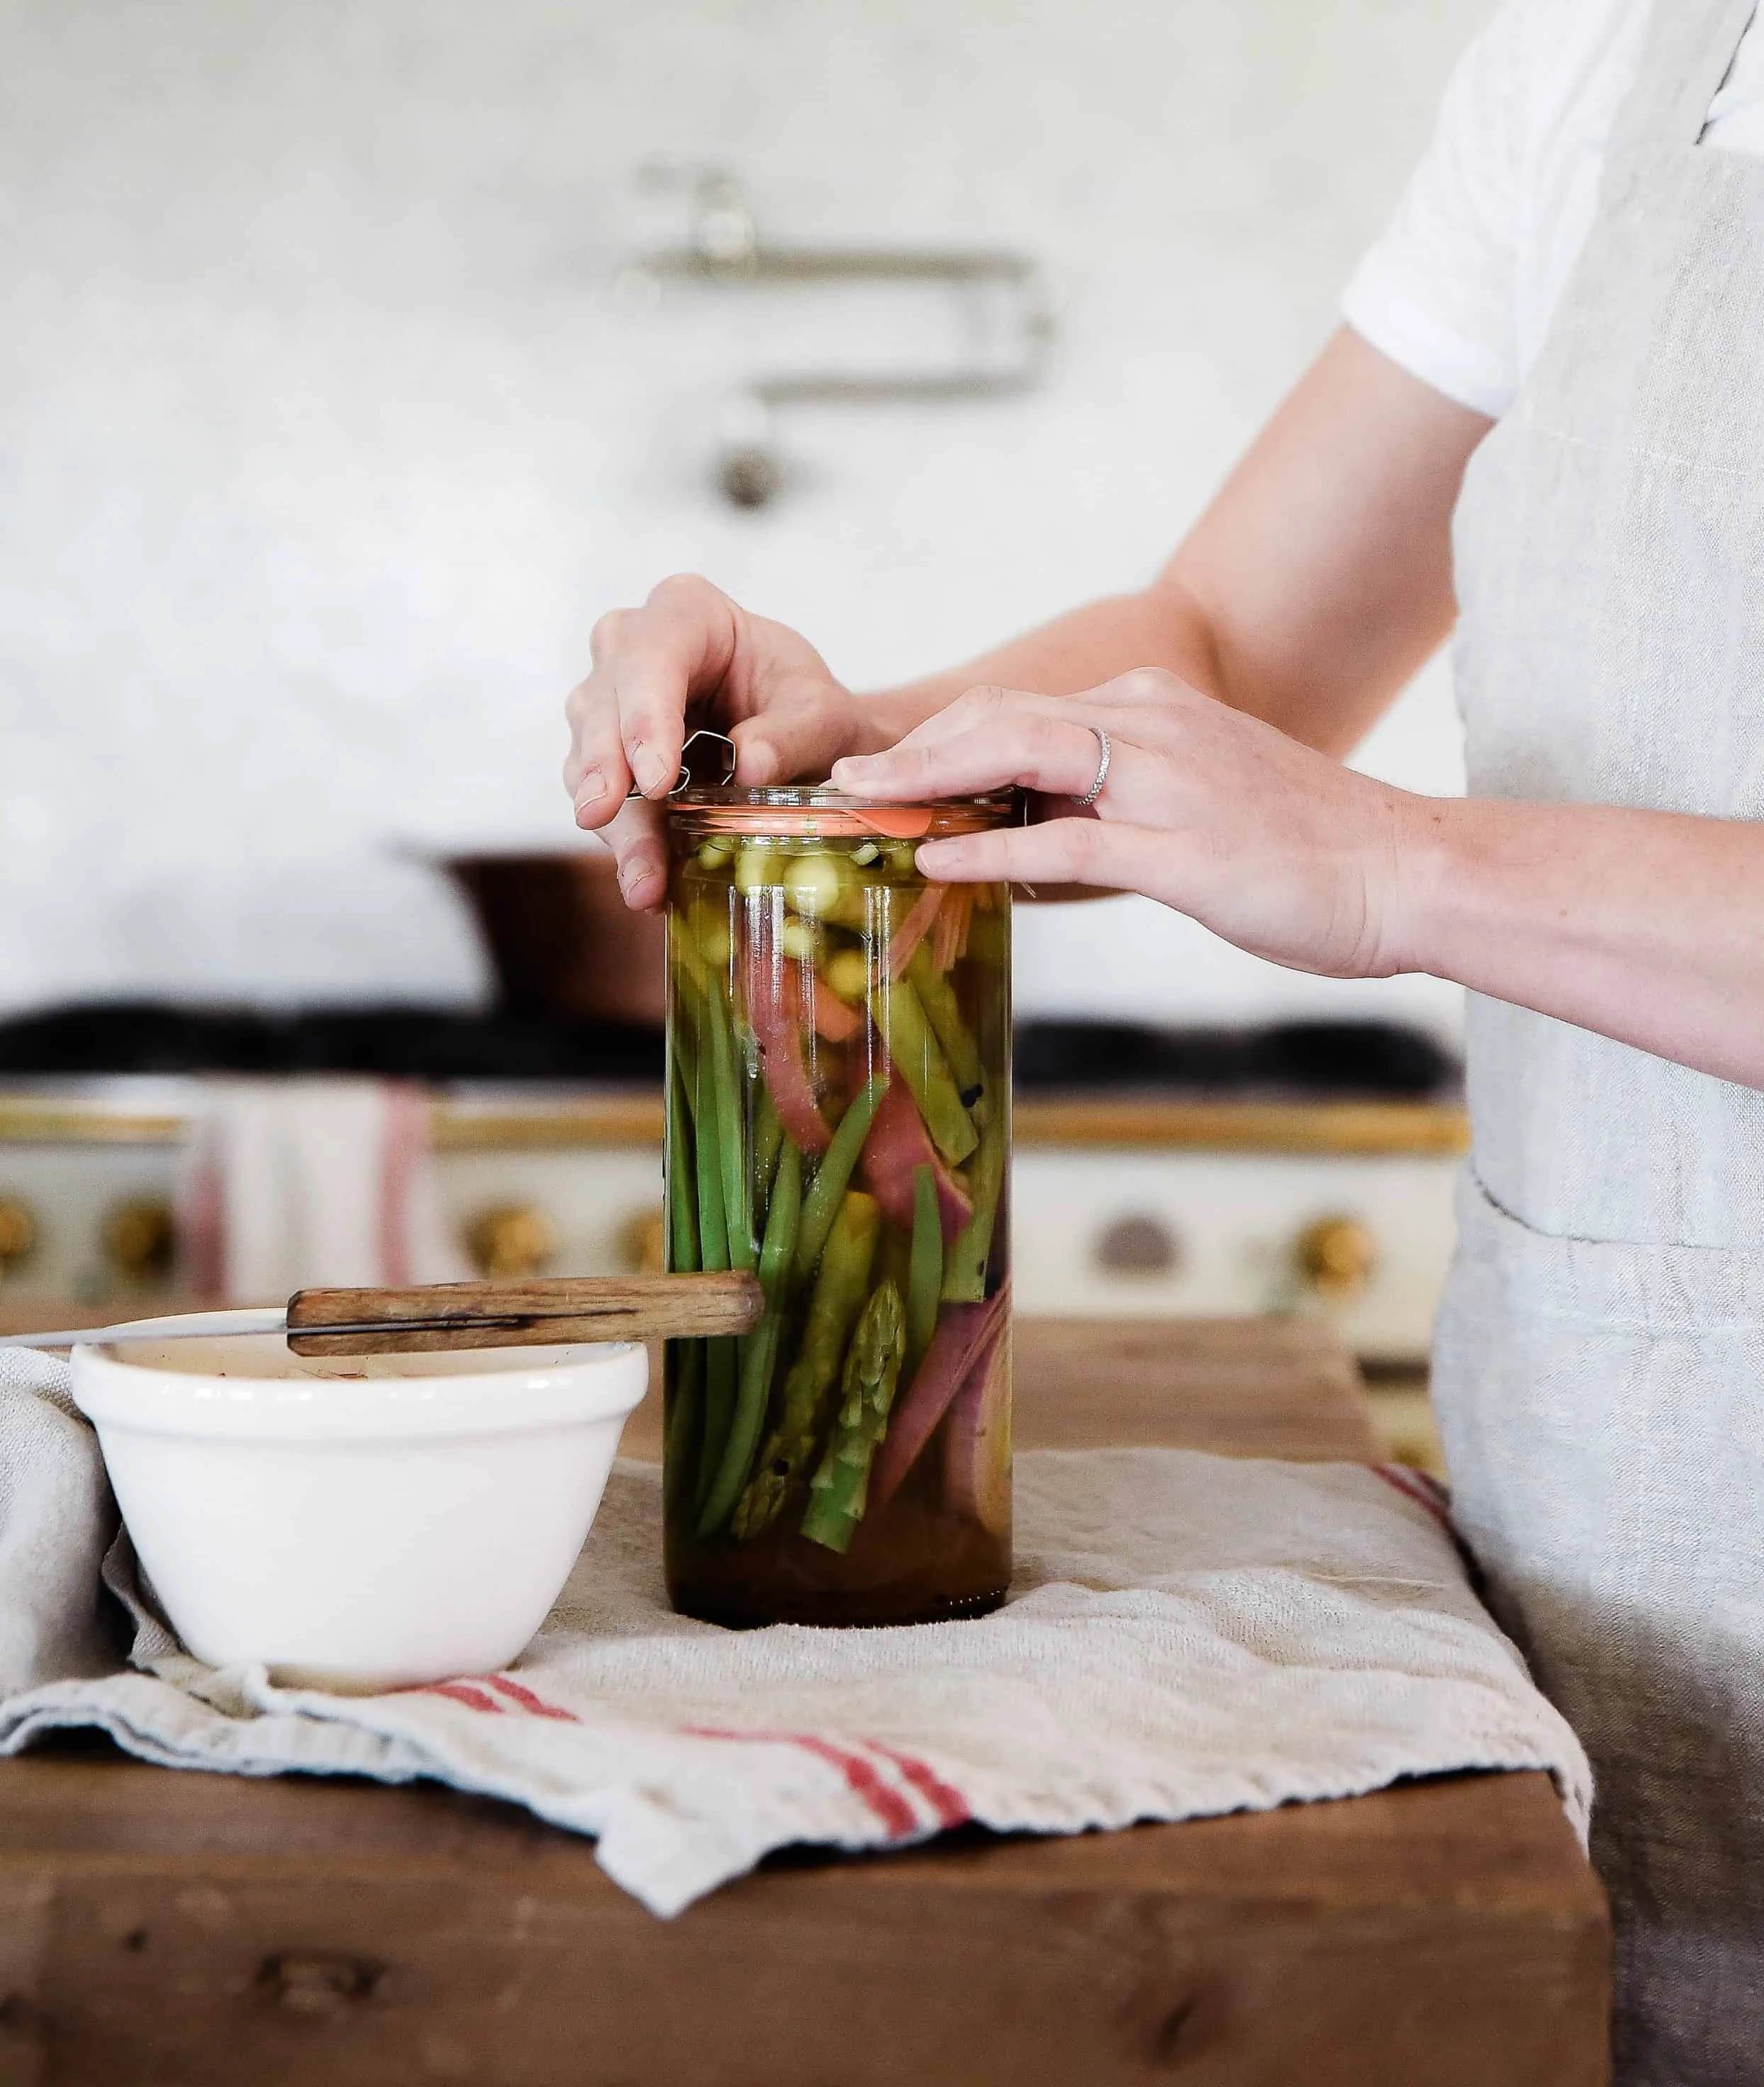 Learn how to make pickled veggies! Refrigerator pickles are the perfect way to enjoy your summer garden harvest!